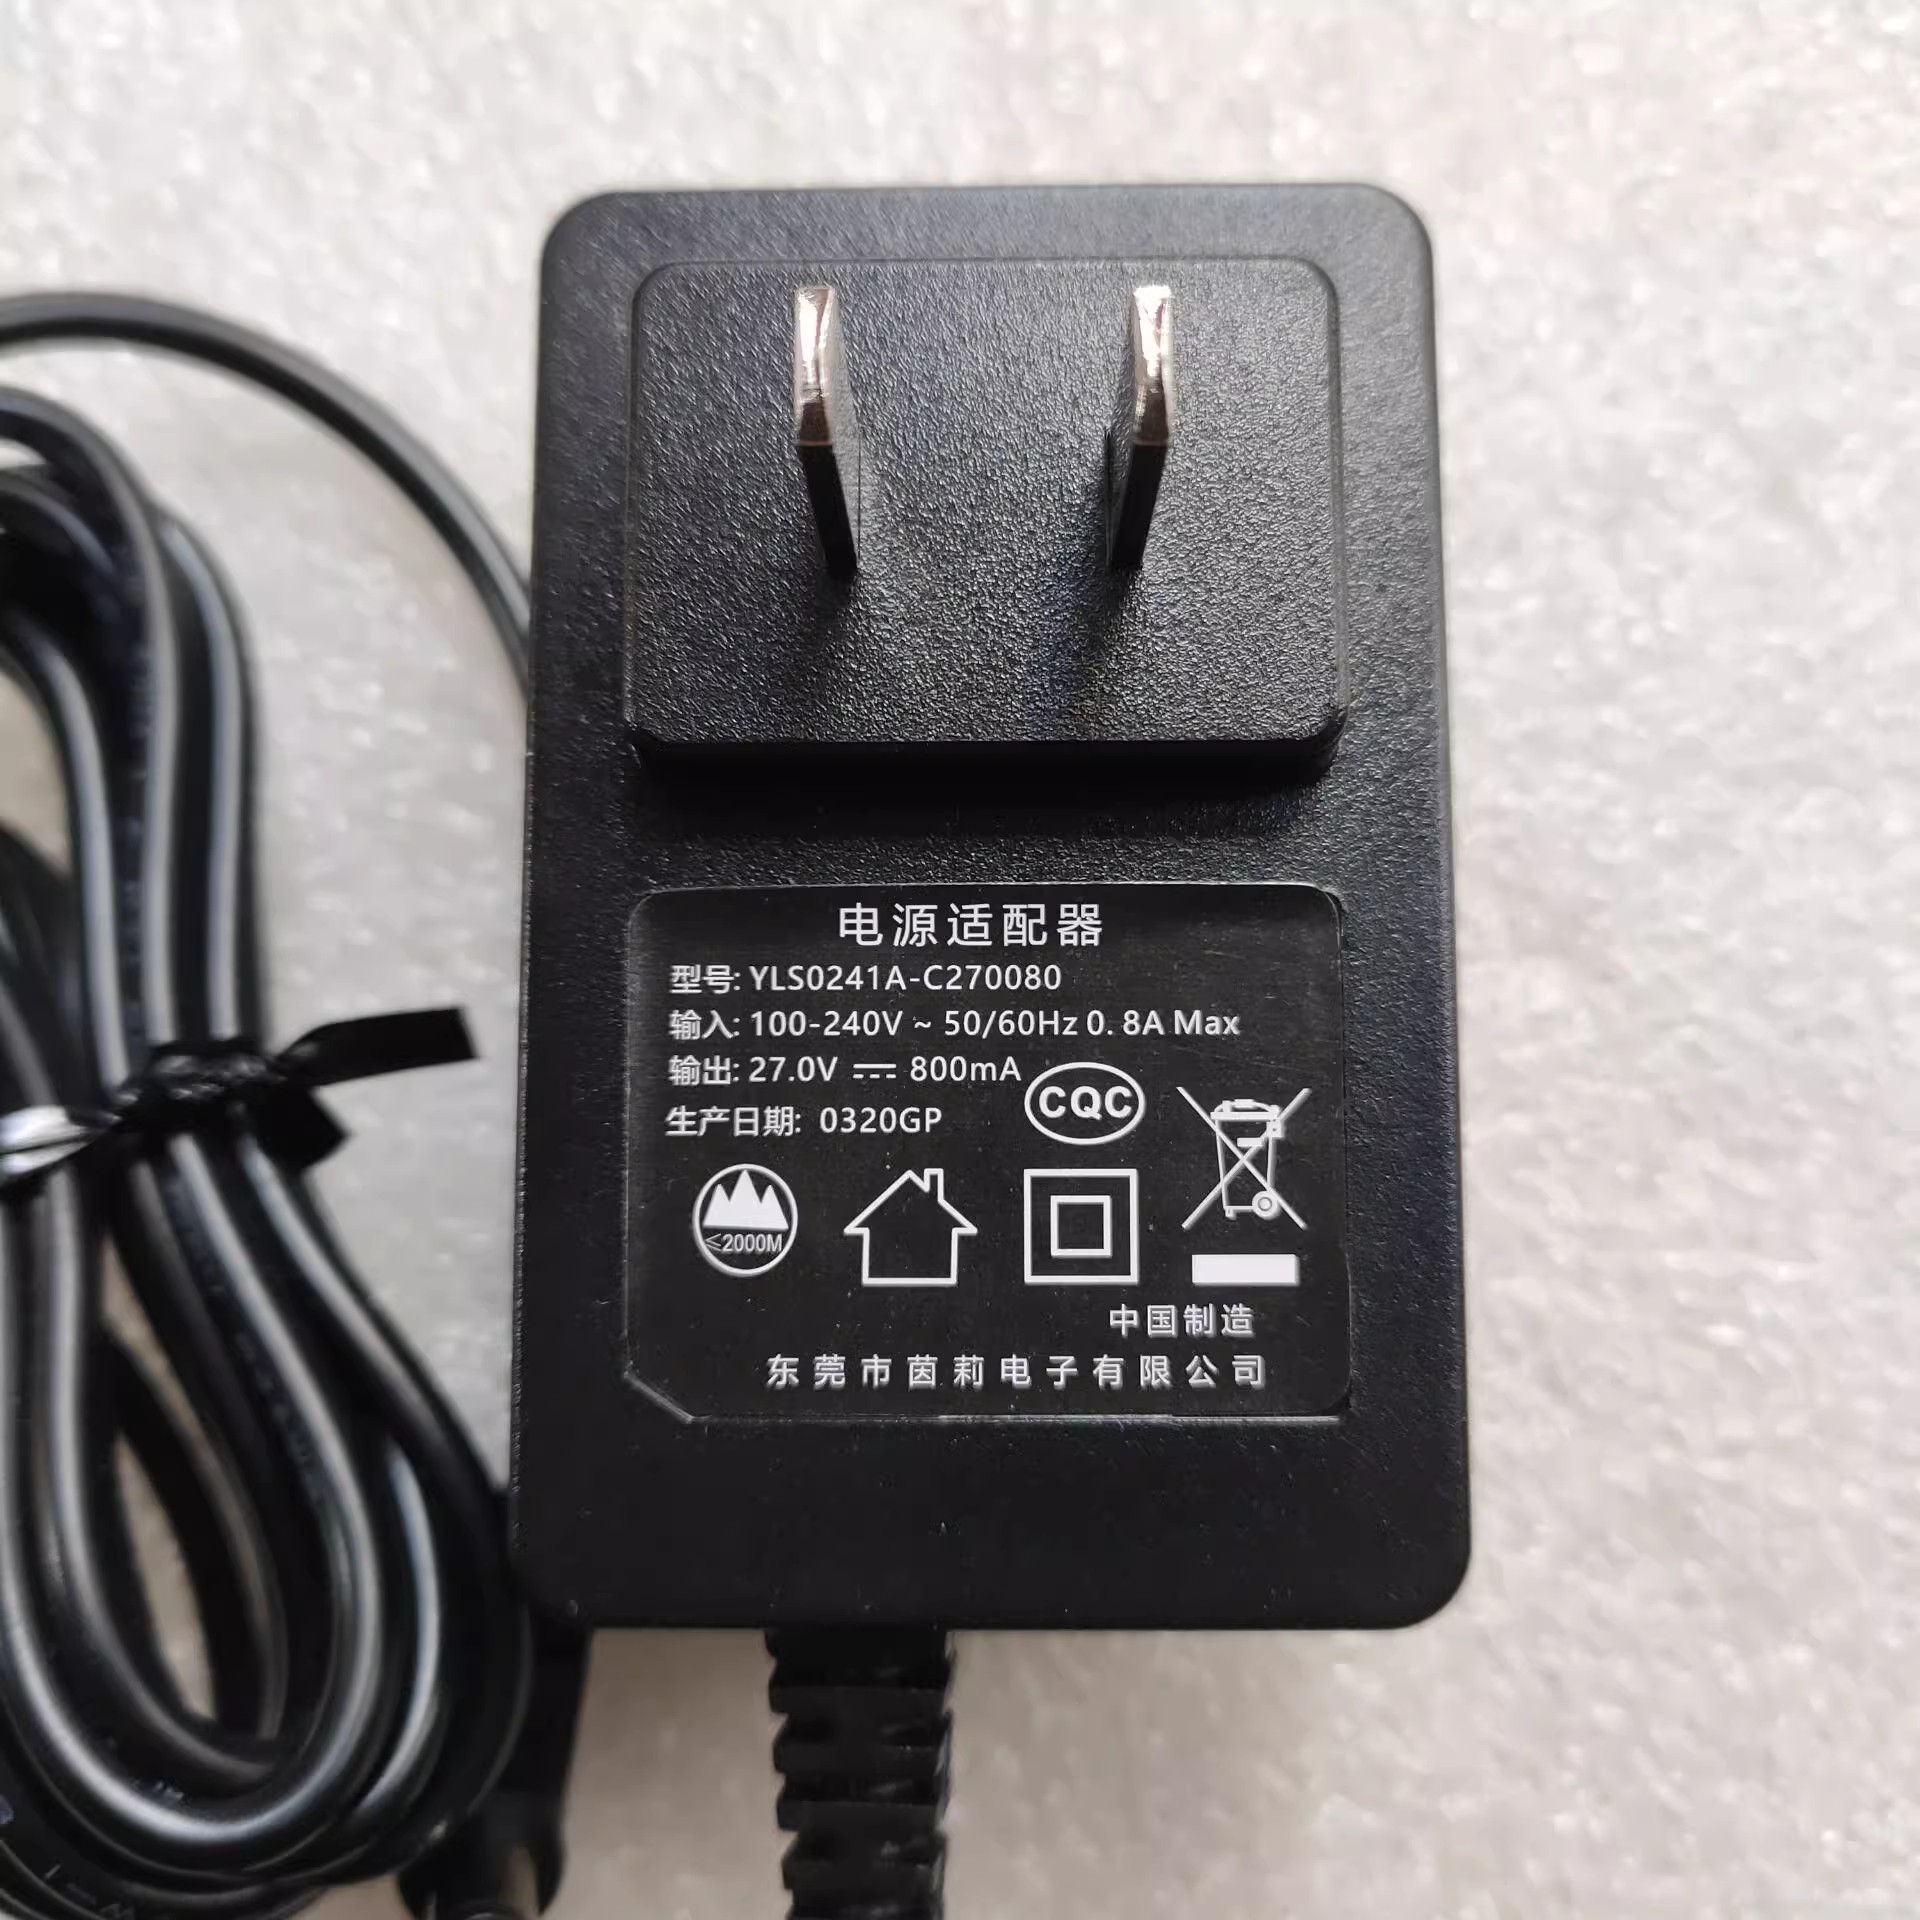 *Brand NEW*27V 800MA AC DC ADAPTHE YLS0241A-C270080 POWER Supply